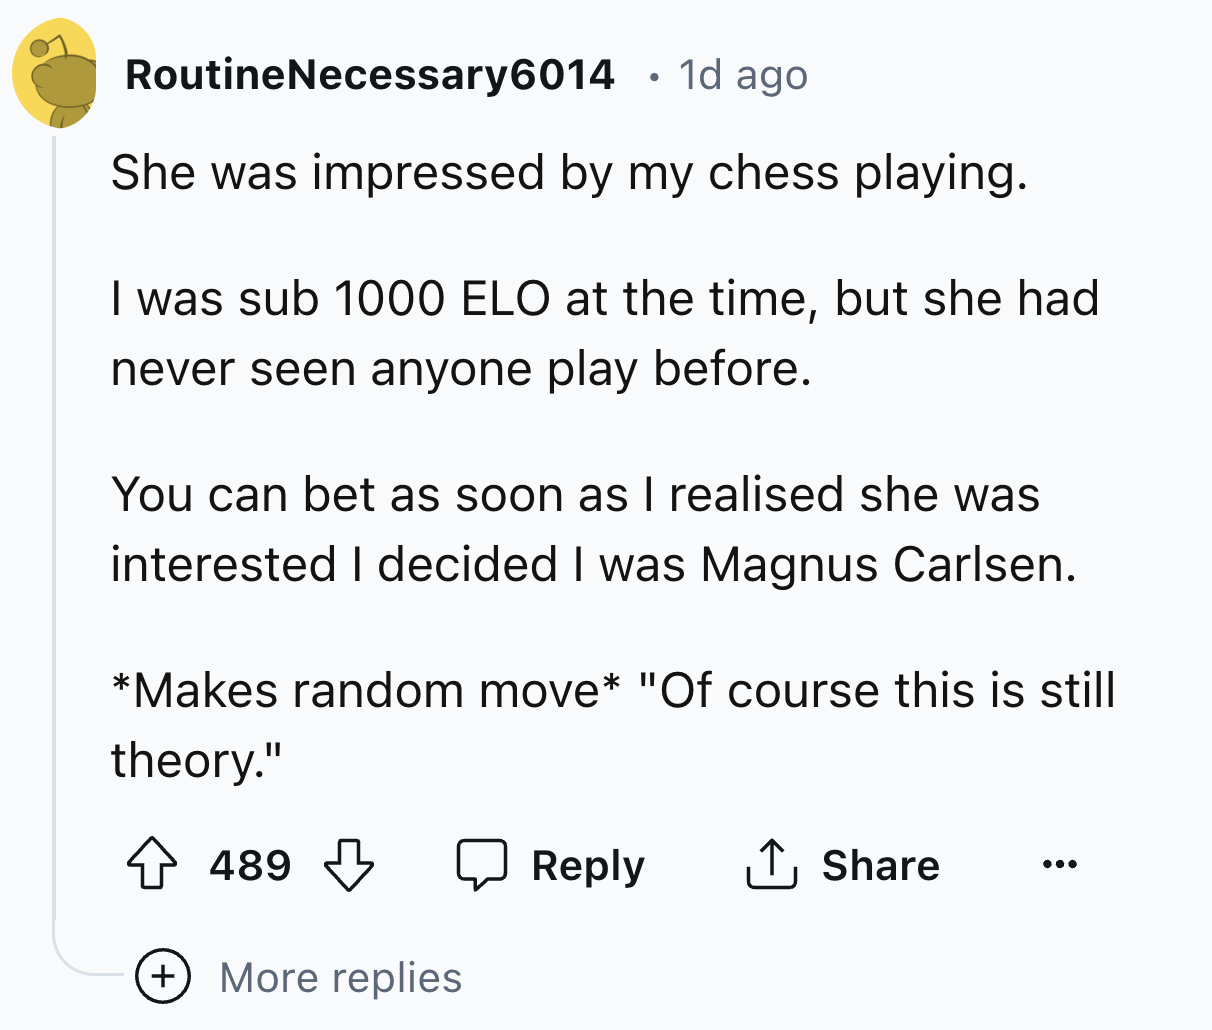 screenshot - RoutineNecessary6014 1d ago She was impressed by my chess playing. I was sub 1000 Elo at the time, but she had never seen anyone play before. You can bet as soon as I realised she was interested I decided I was Magnus Carlsen. Makes random mo